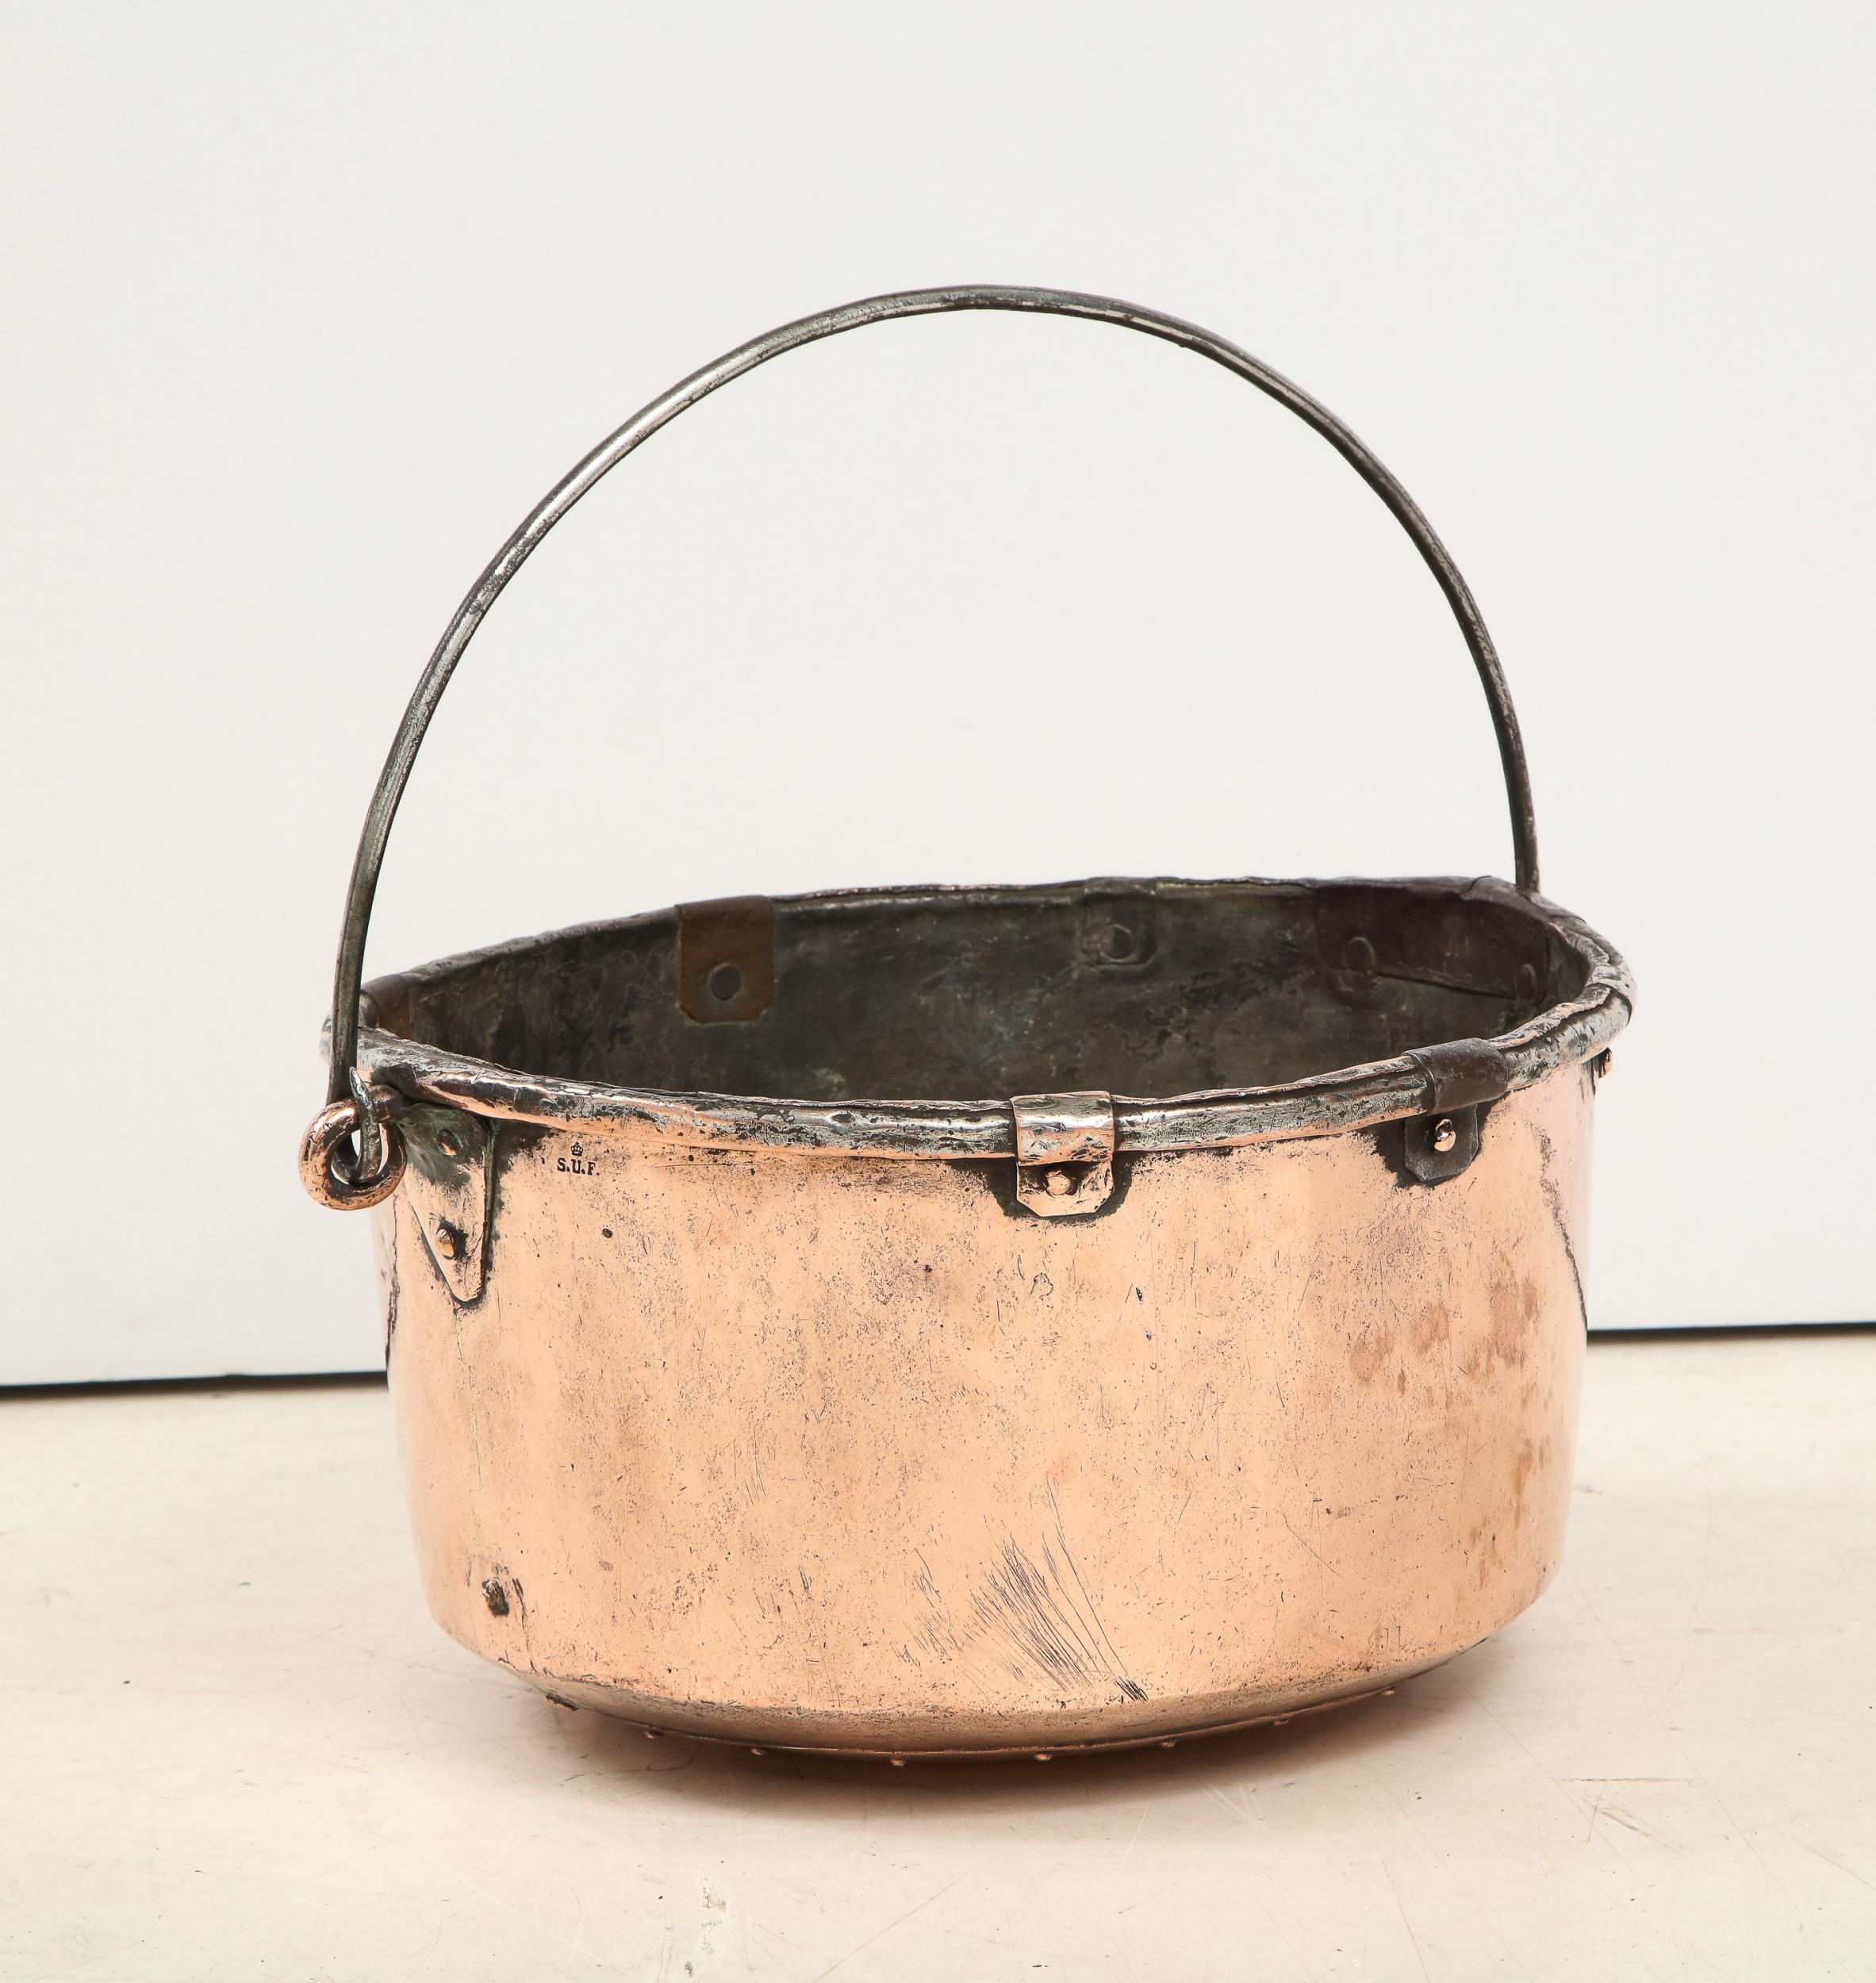 Good 19th century French copper pail, having wrought iron handle and banding with hammered copper body and hand riveted seams.